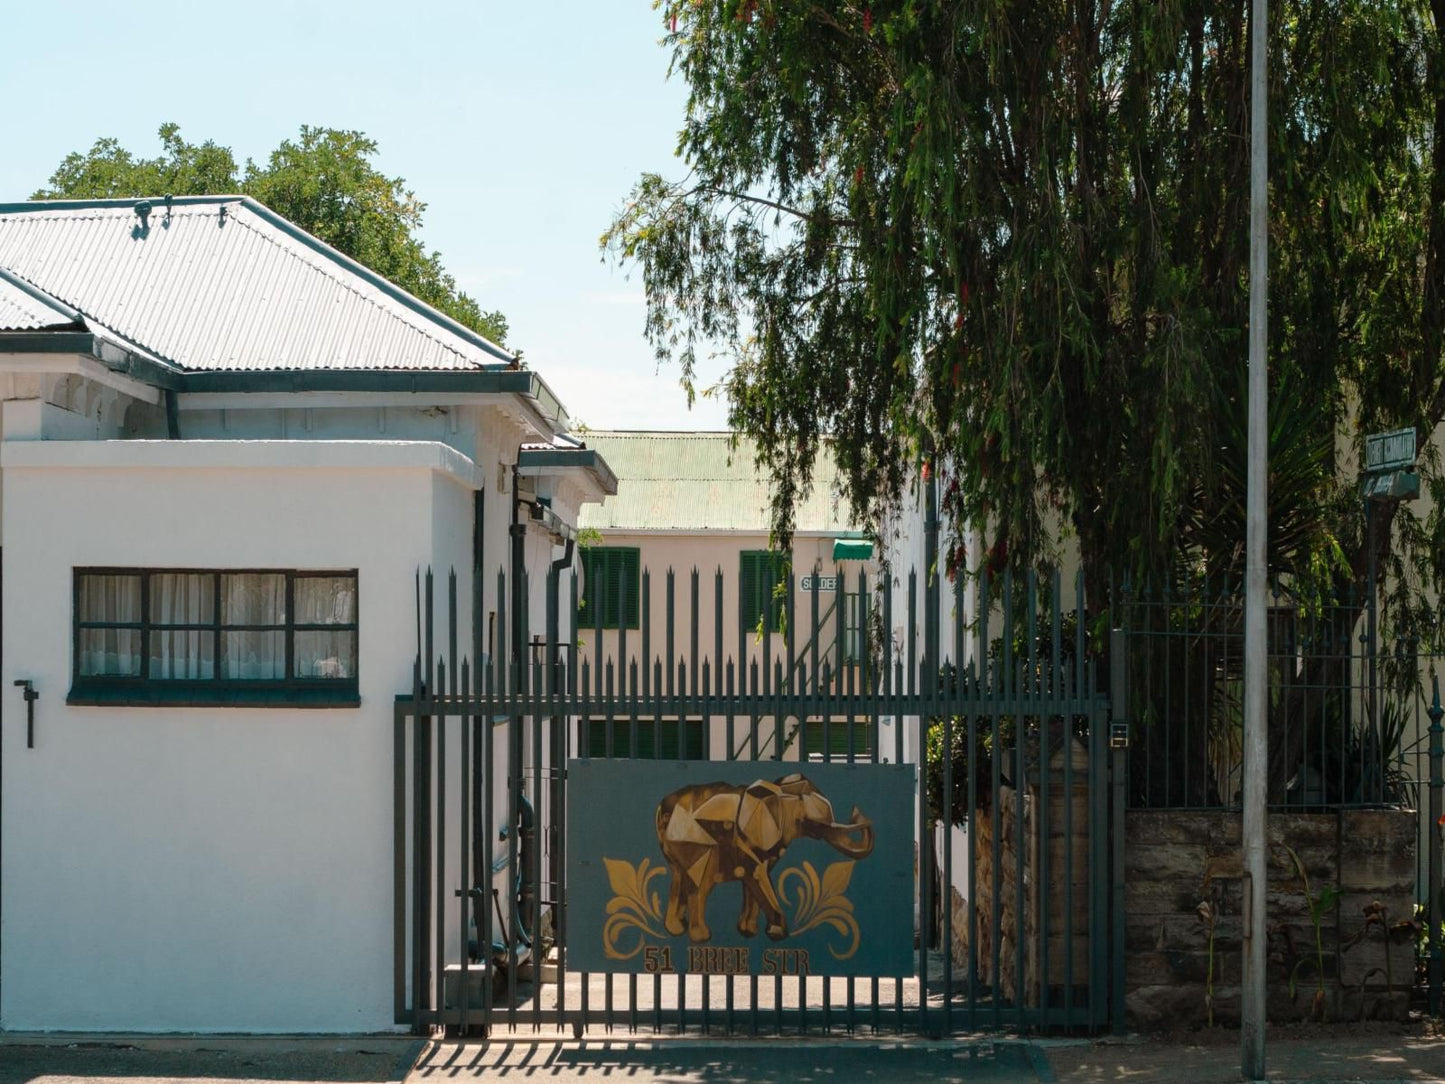 Golden Elephant Guest House Heilbron Free State South Africa House, Building, Architecture